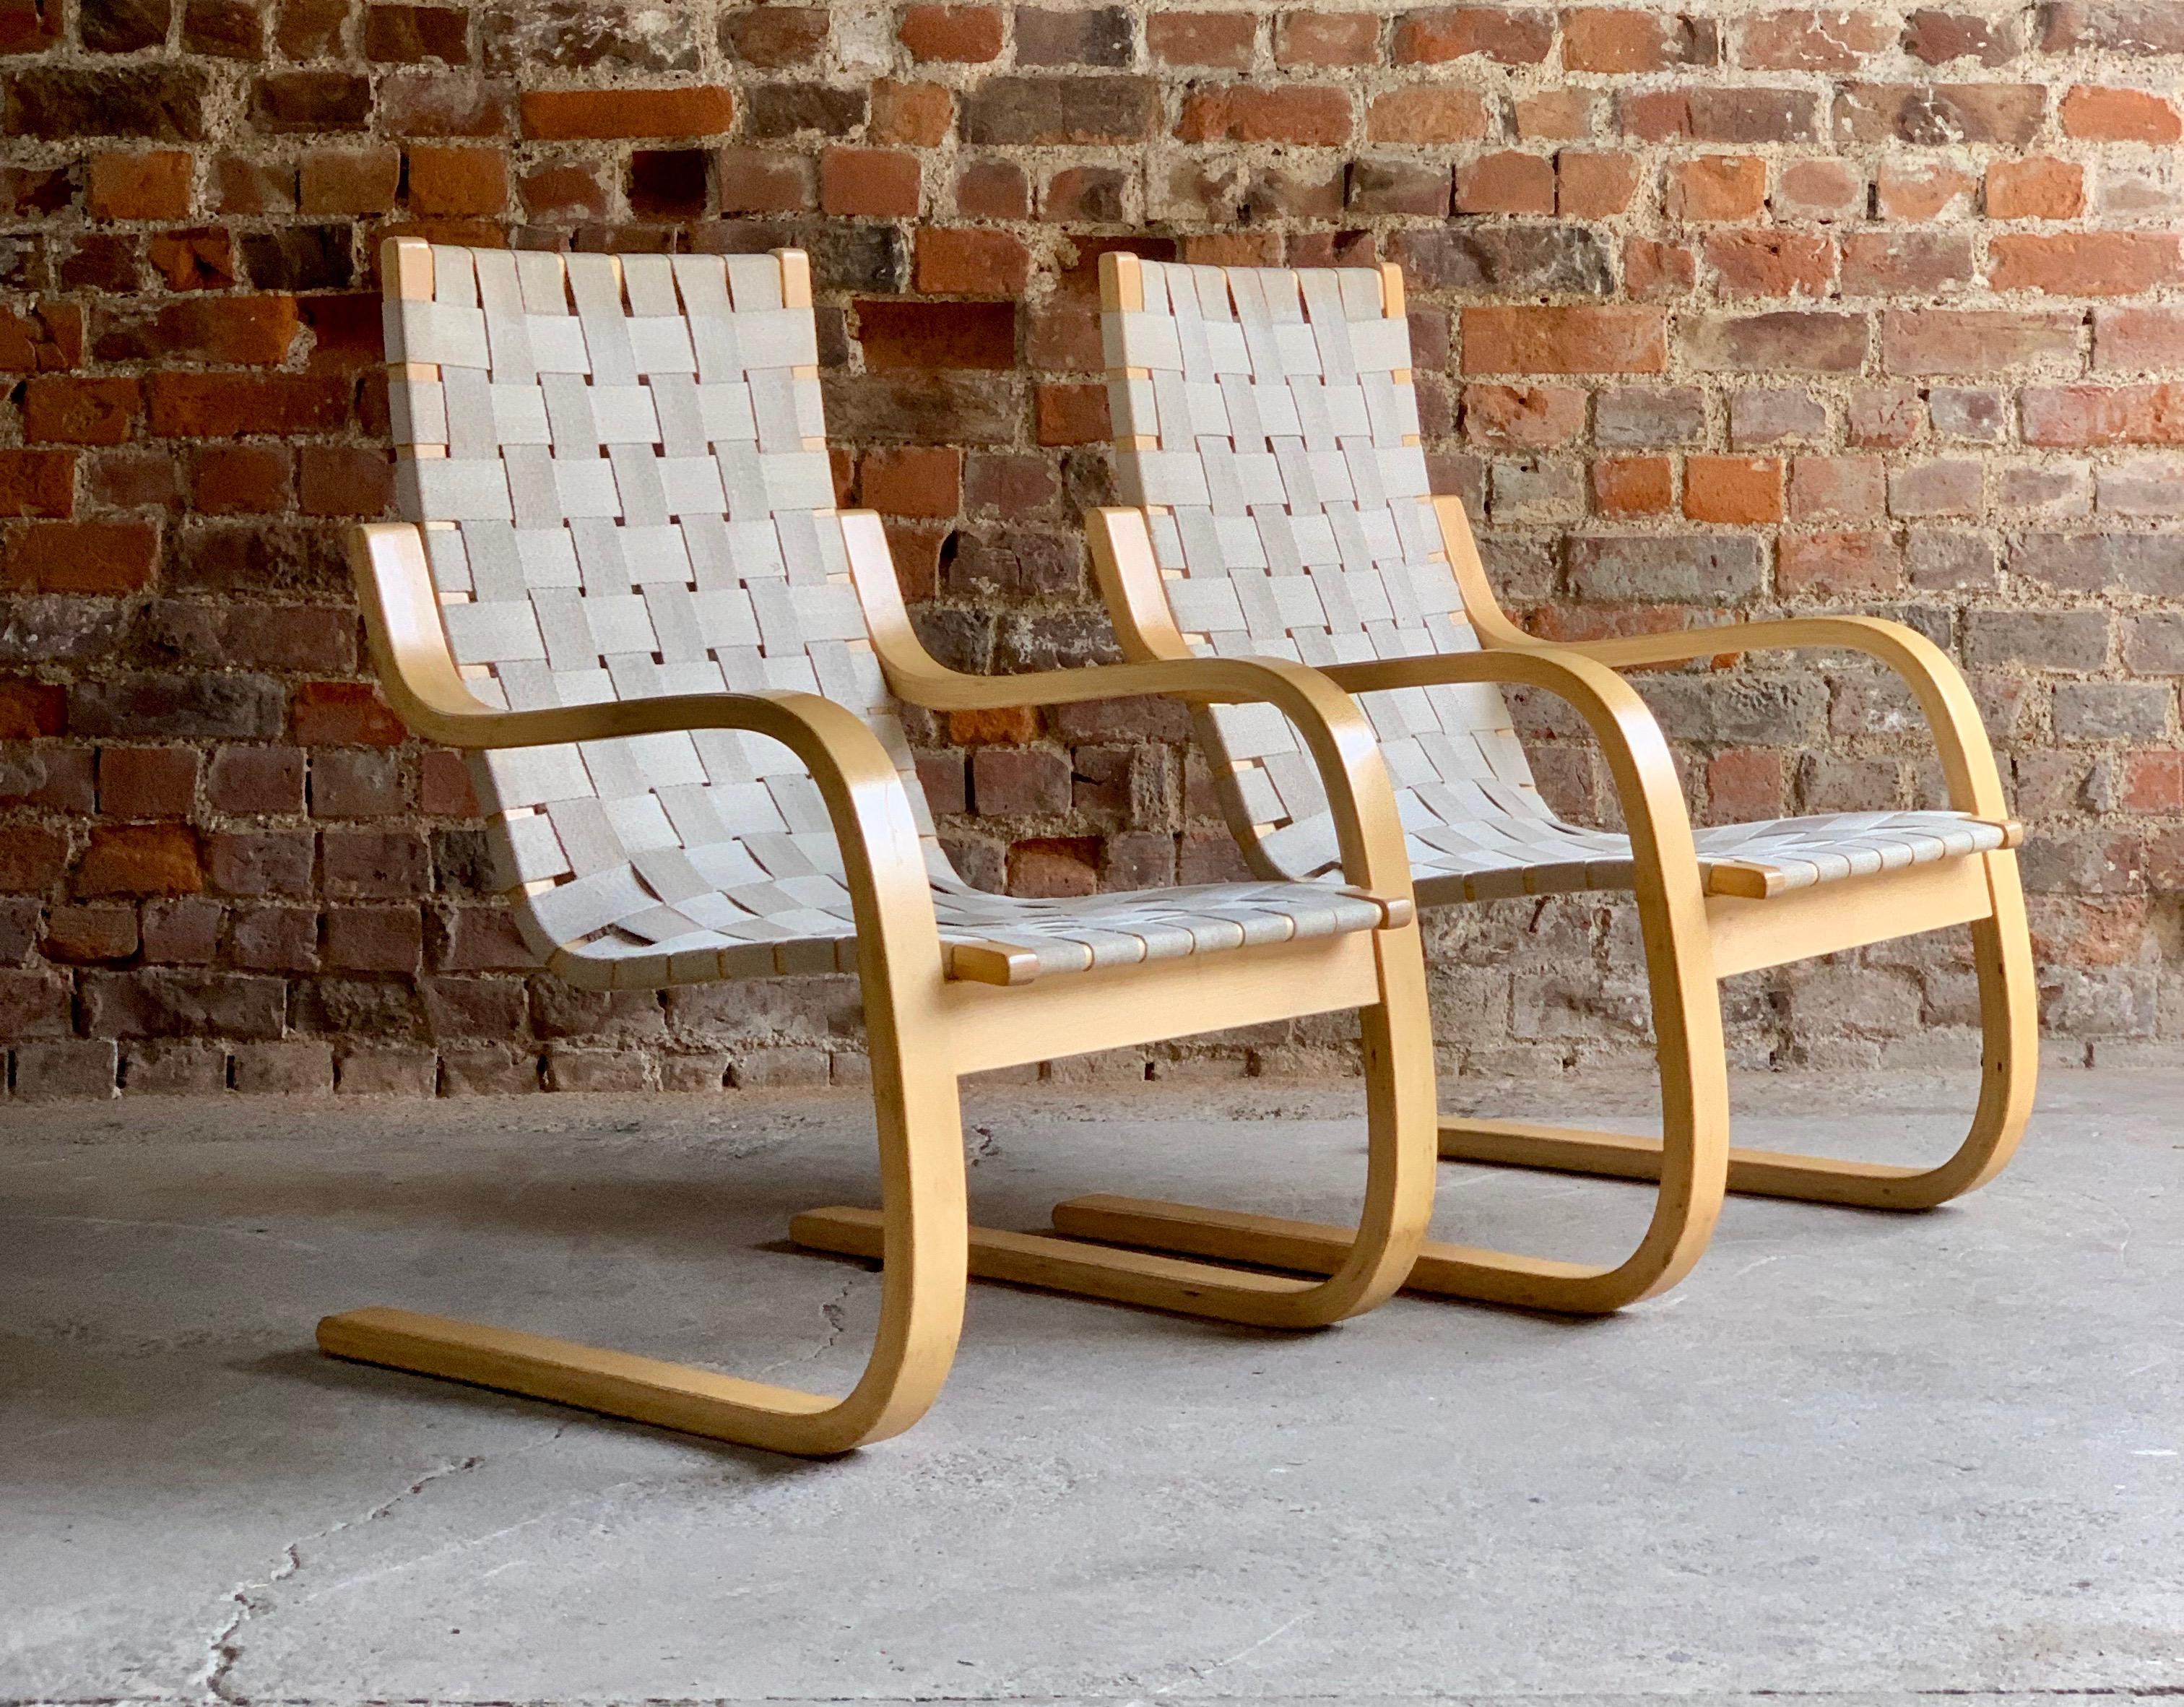 Alvar Aalto armchair model 406 pair of Cantilever chairs by Artek, circa 1970s

Magnificent early Alvar Aalto model 406 Cantilever lounge chairs by Artek circa 1970s, natural bentwood laminated Birch frames with woven canvas strapped